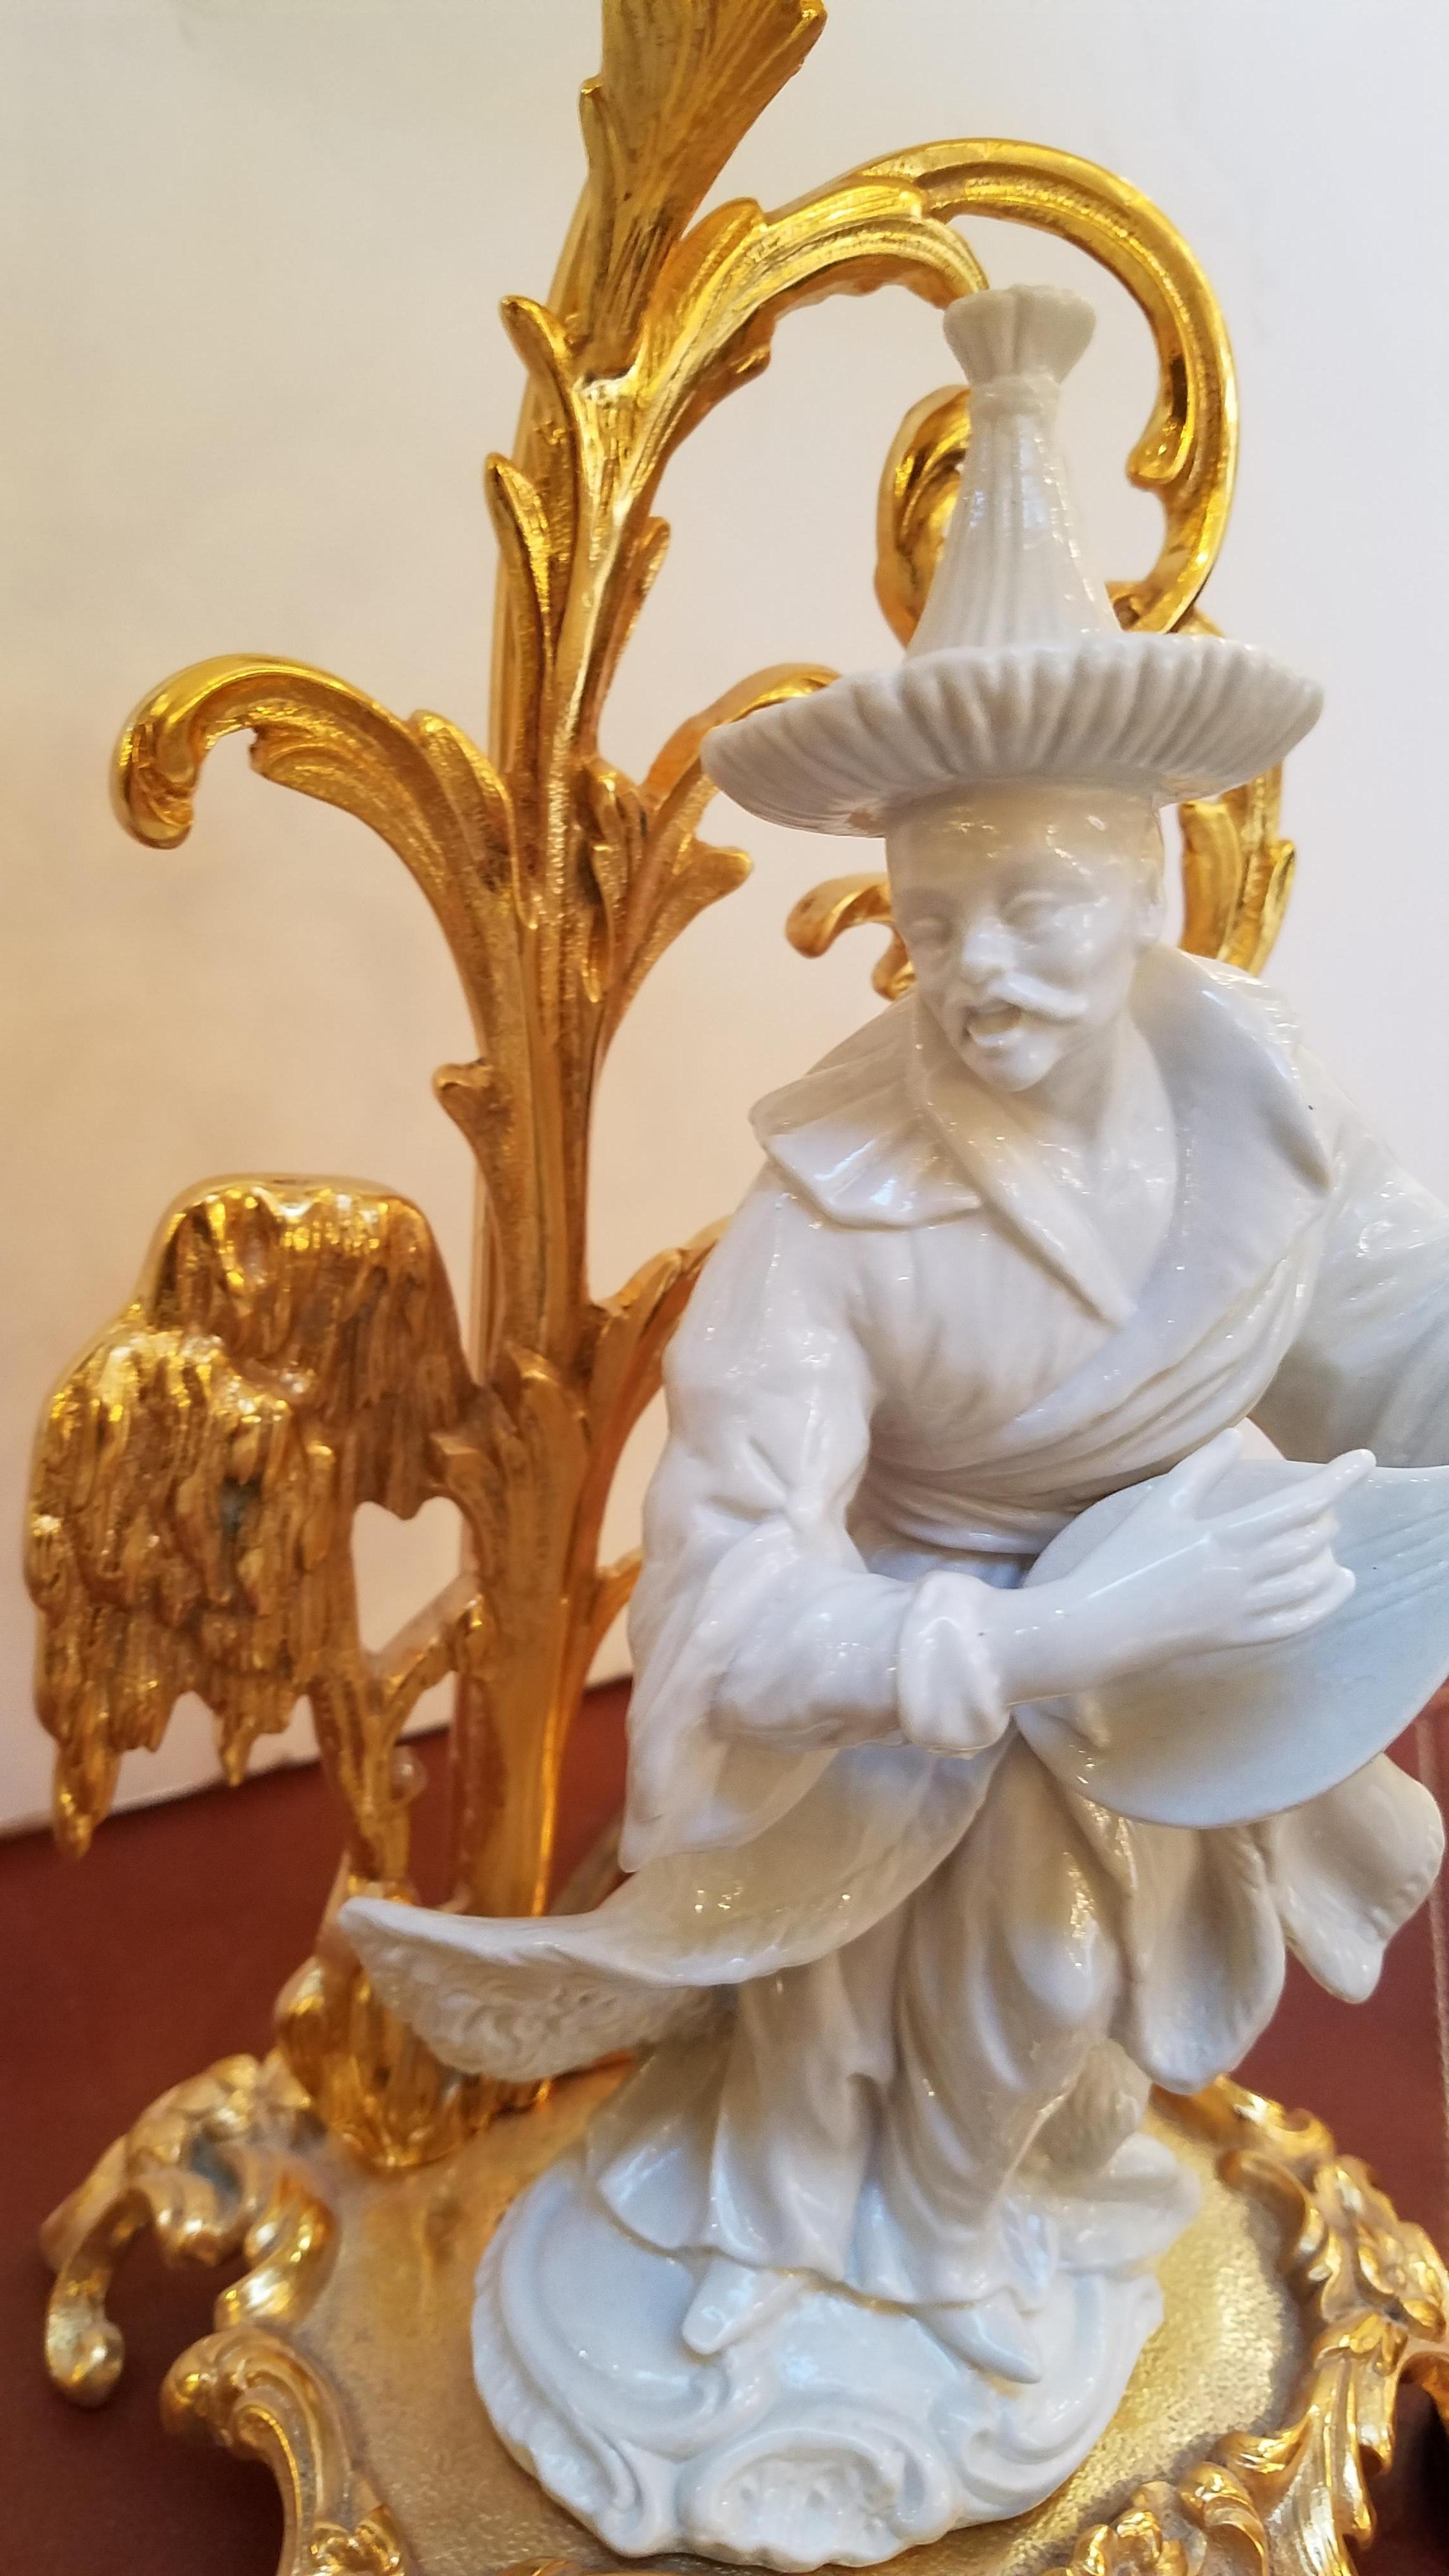 Wonderful and whimsical chinoiserie Blanc de chine porcelain figure of a musician mounted on 22-karat gold-plated Rococo style base and surround with a beautiful custom silk pagoda shade.